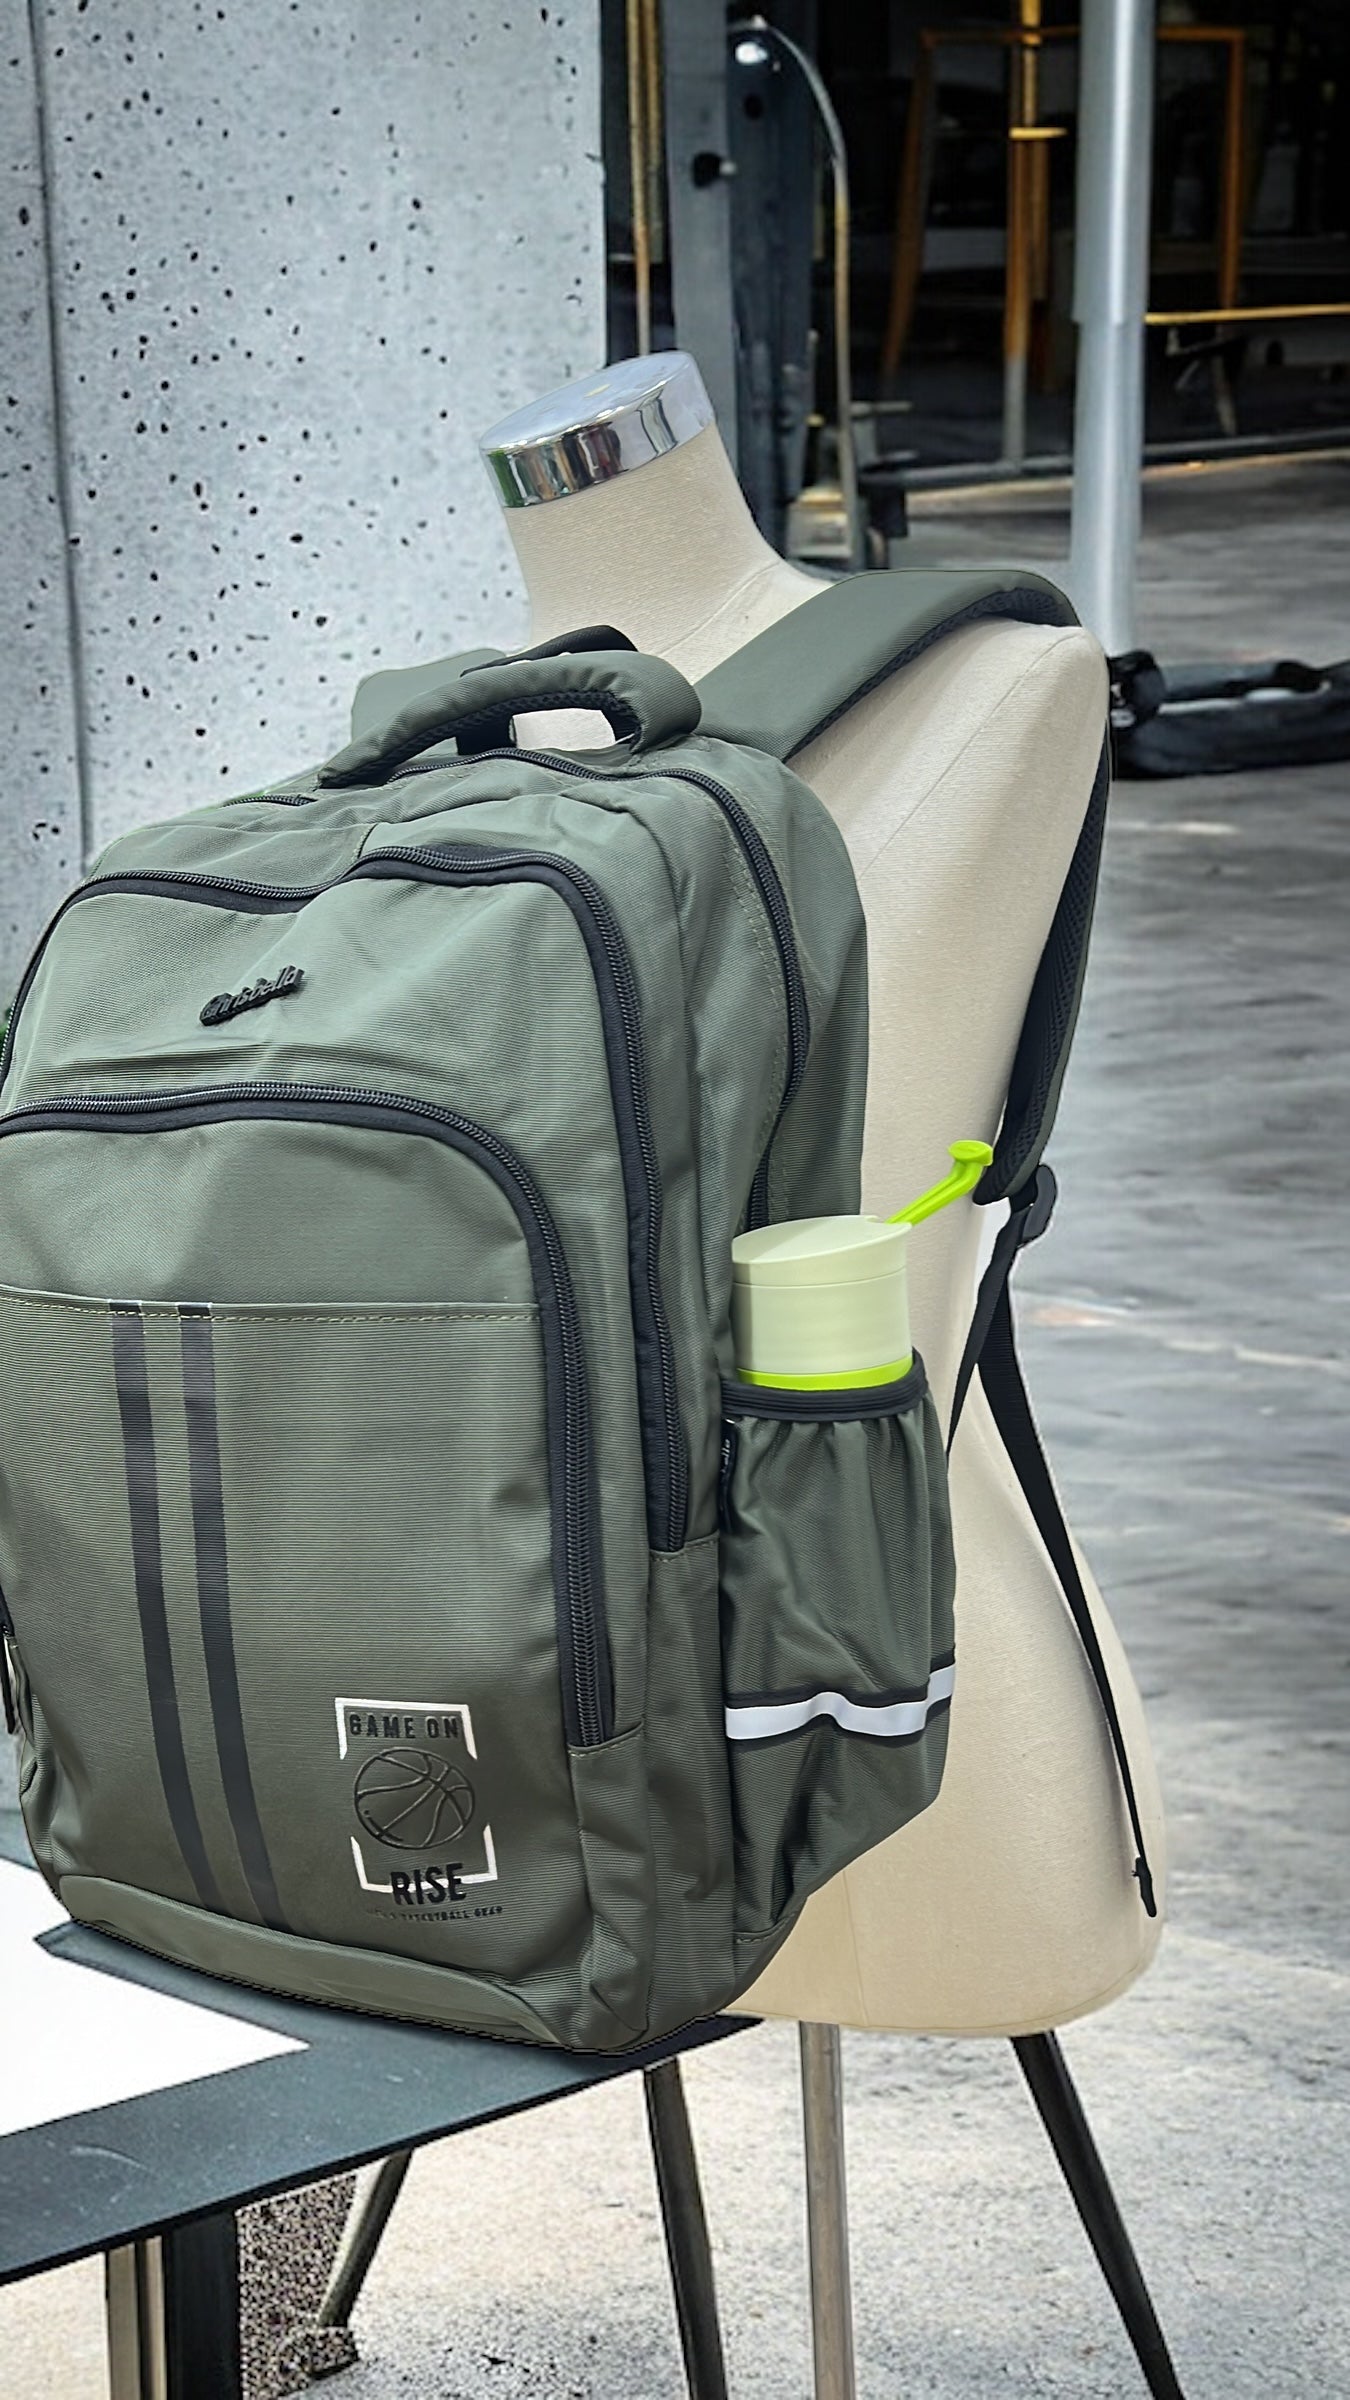 CHRISBELLA GAME ON BACKPACK IN ARMY GREEN